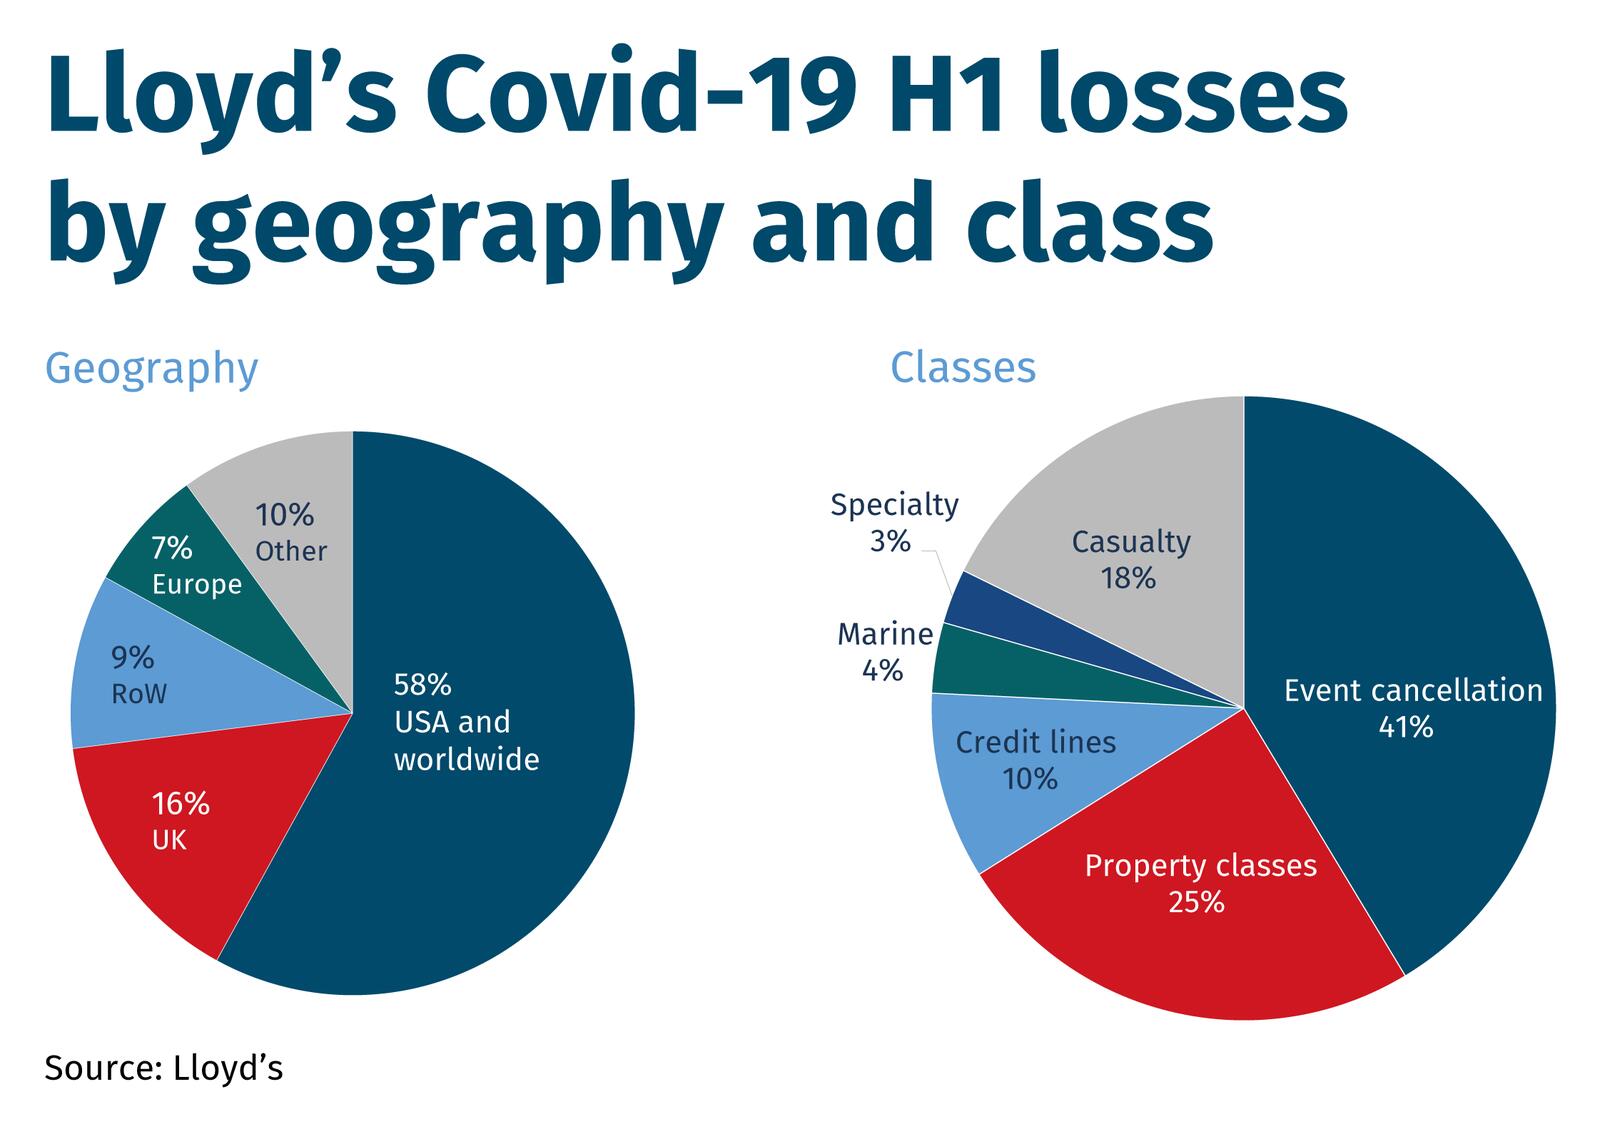 Lloyd’s Covid-19 H1 lossesby geography and class